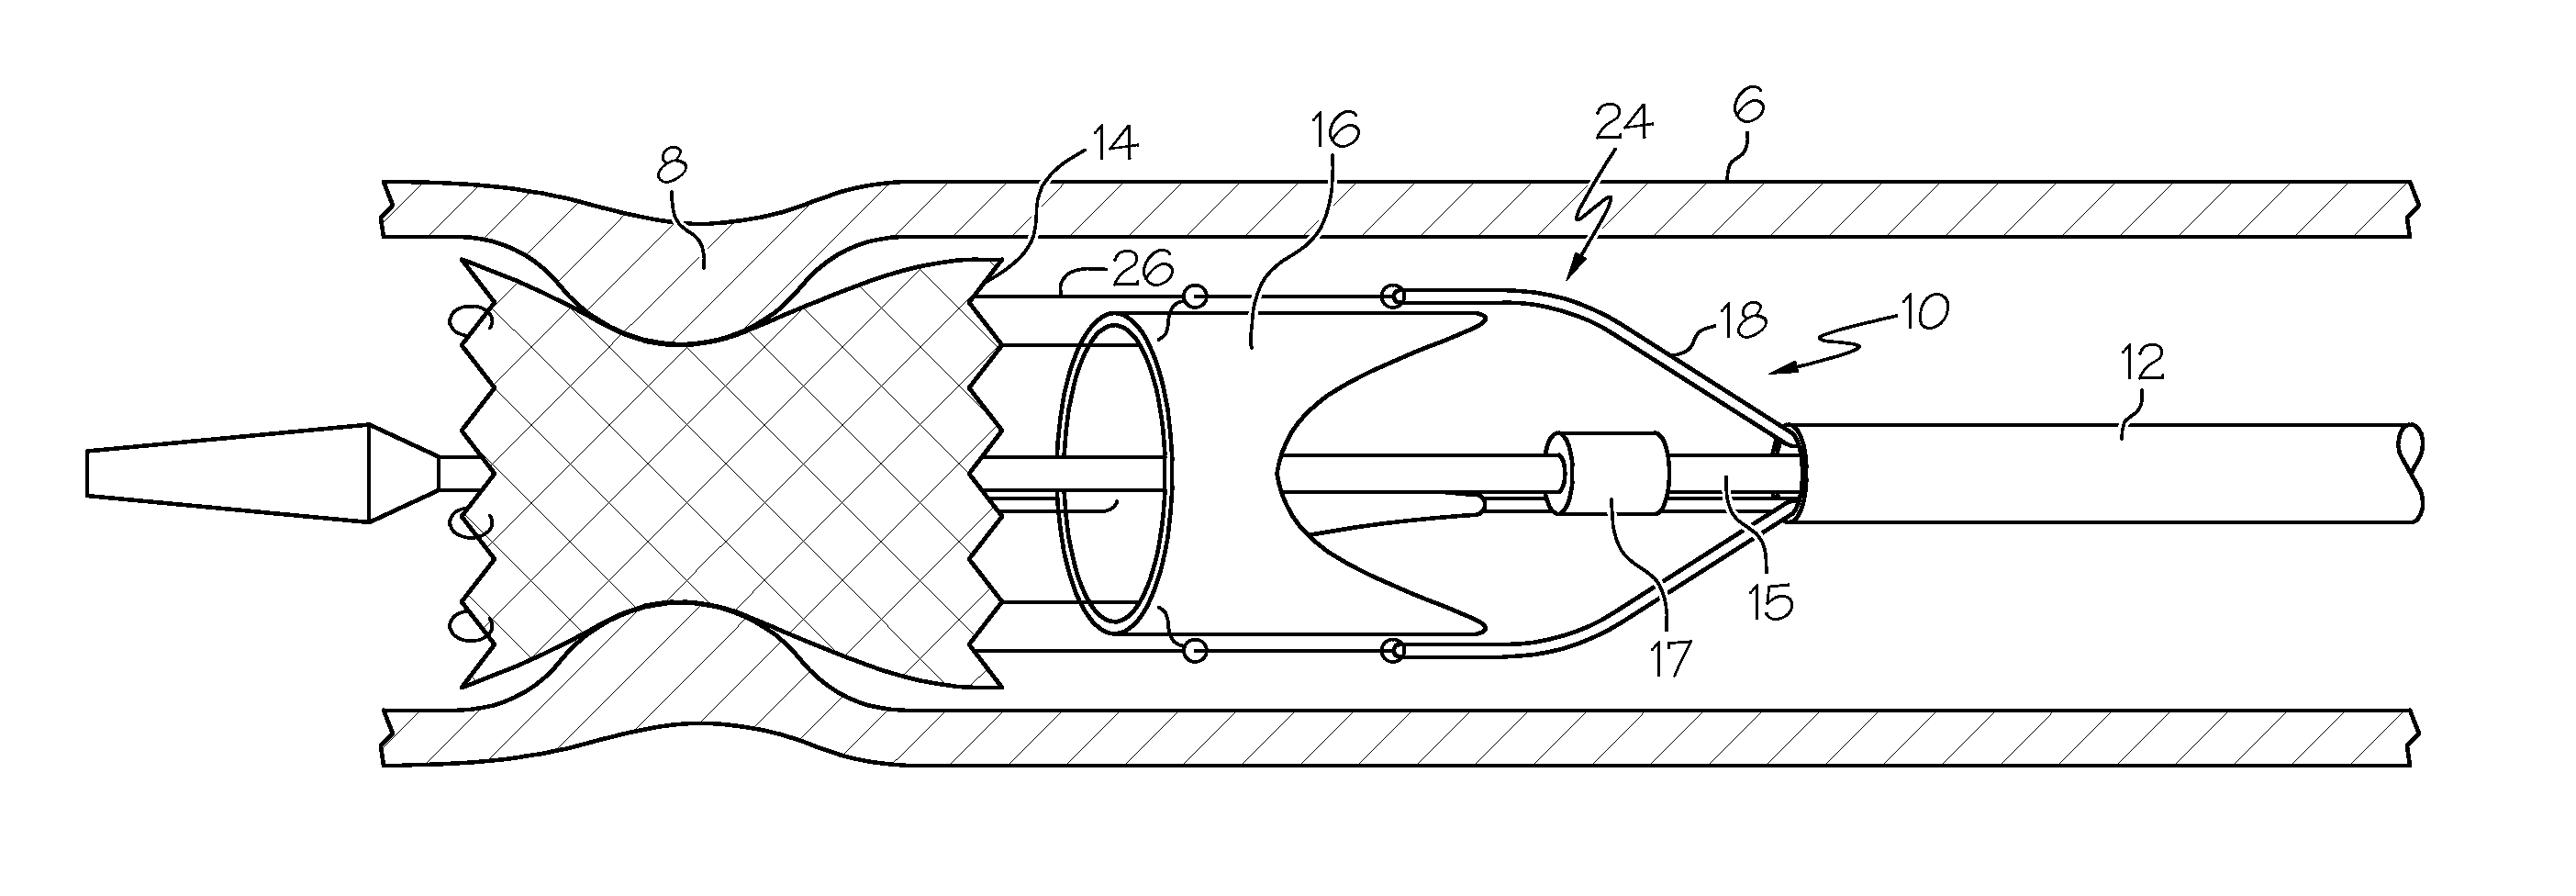 Low Profile Heart Valve Delivery System and Method